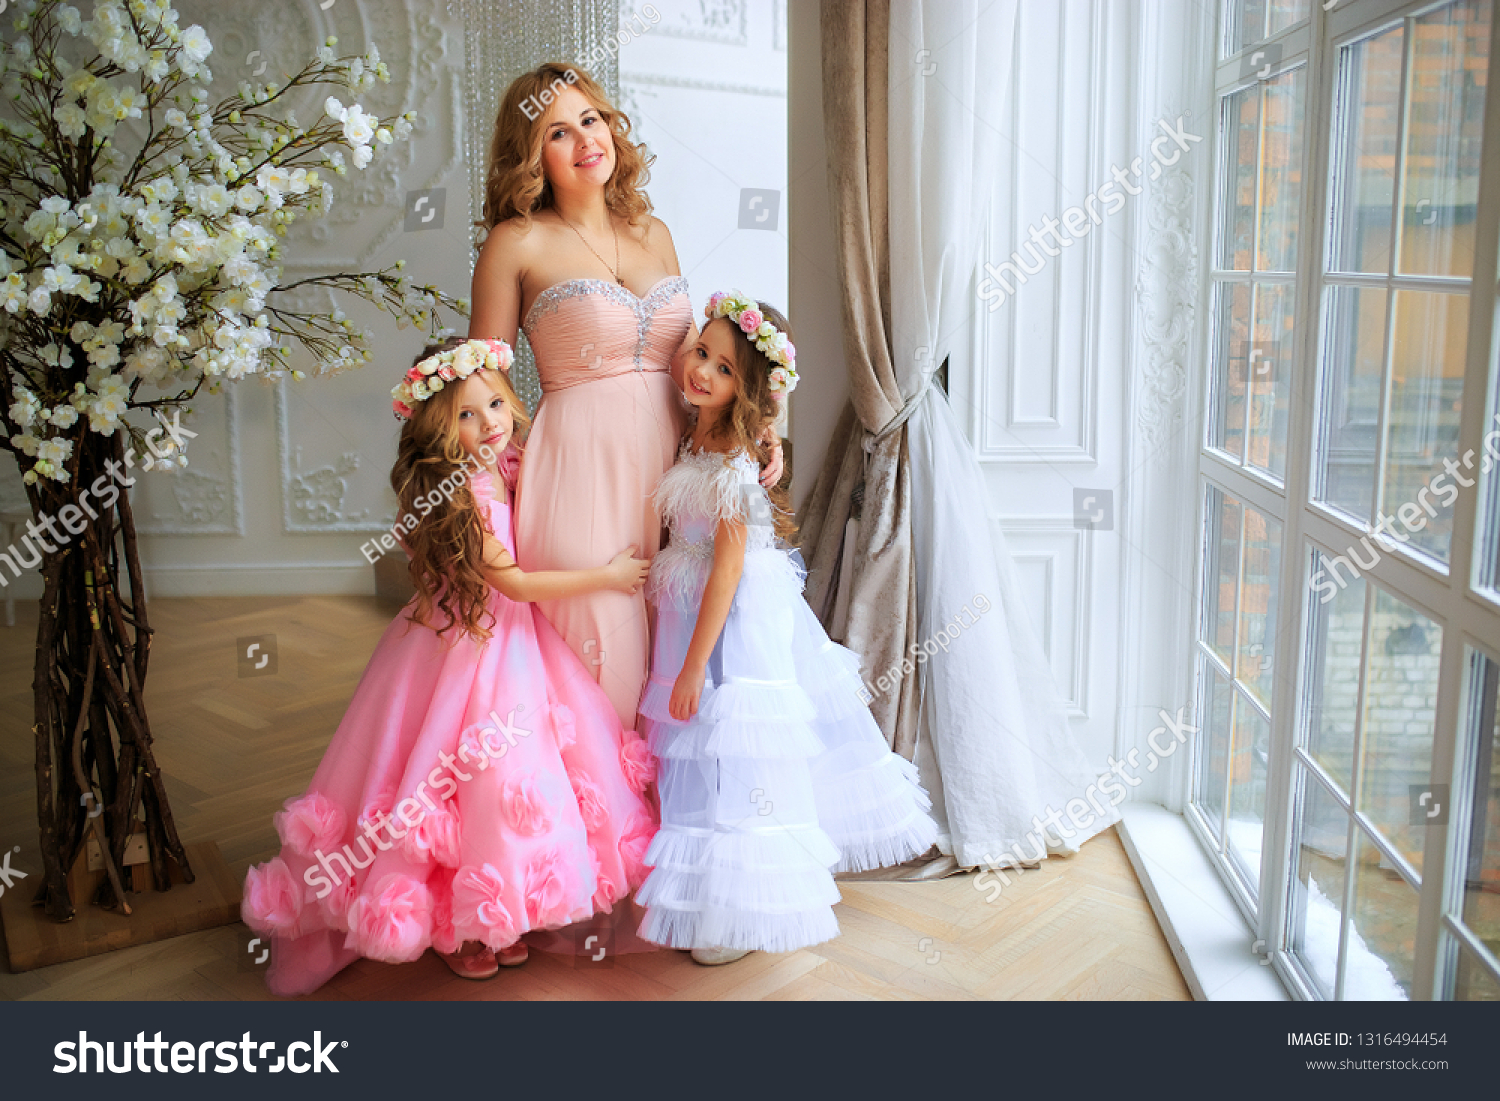 100 Mother Daughter Collection Online ideas | mother daughter dress, mother  daughter, mother daughter dresses matching